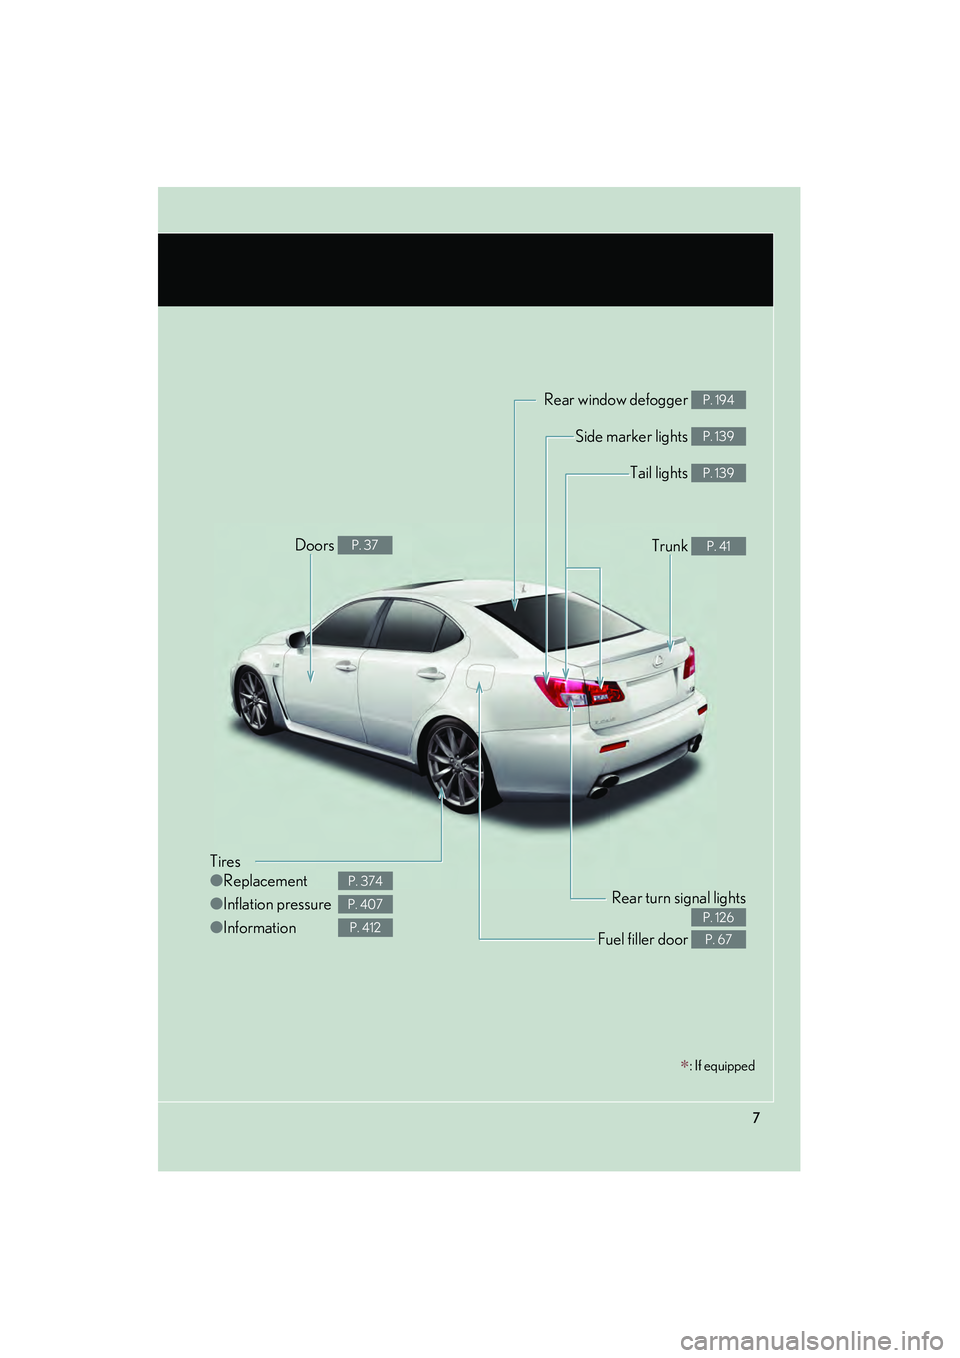 Lexus IS F 2008  Owners Manual 08_IS F_U_(L/O_0711)
7
∗: If equipped
Tires
●Replacement
● Inflation pressure
● Information
P. 374
P. 407
P. 412
Tail lights P. 139
Side marker lights P. 139
Trunk P. 41
Rear window defogger P